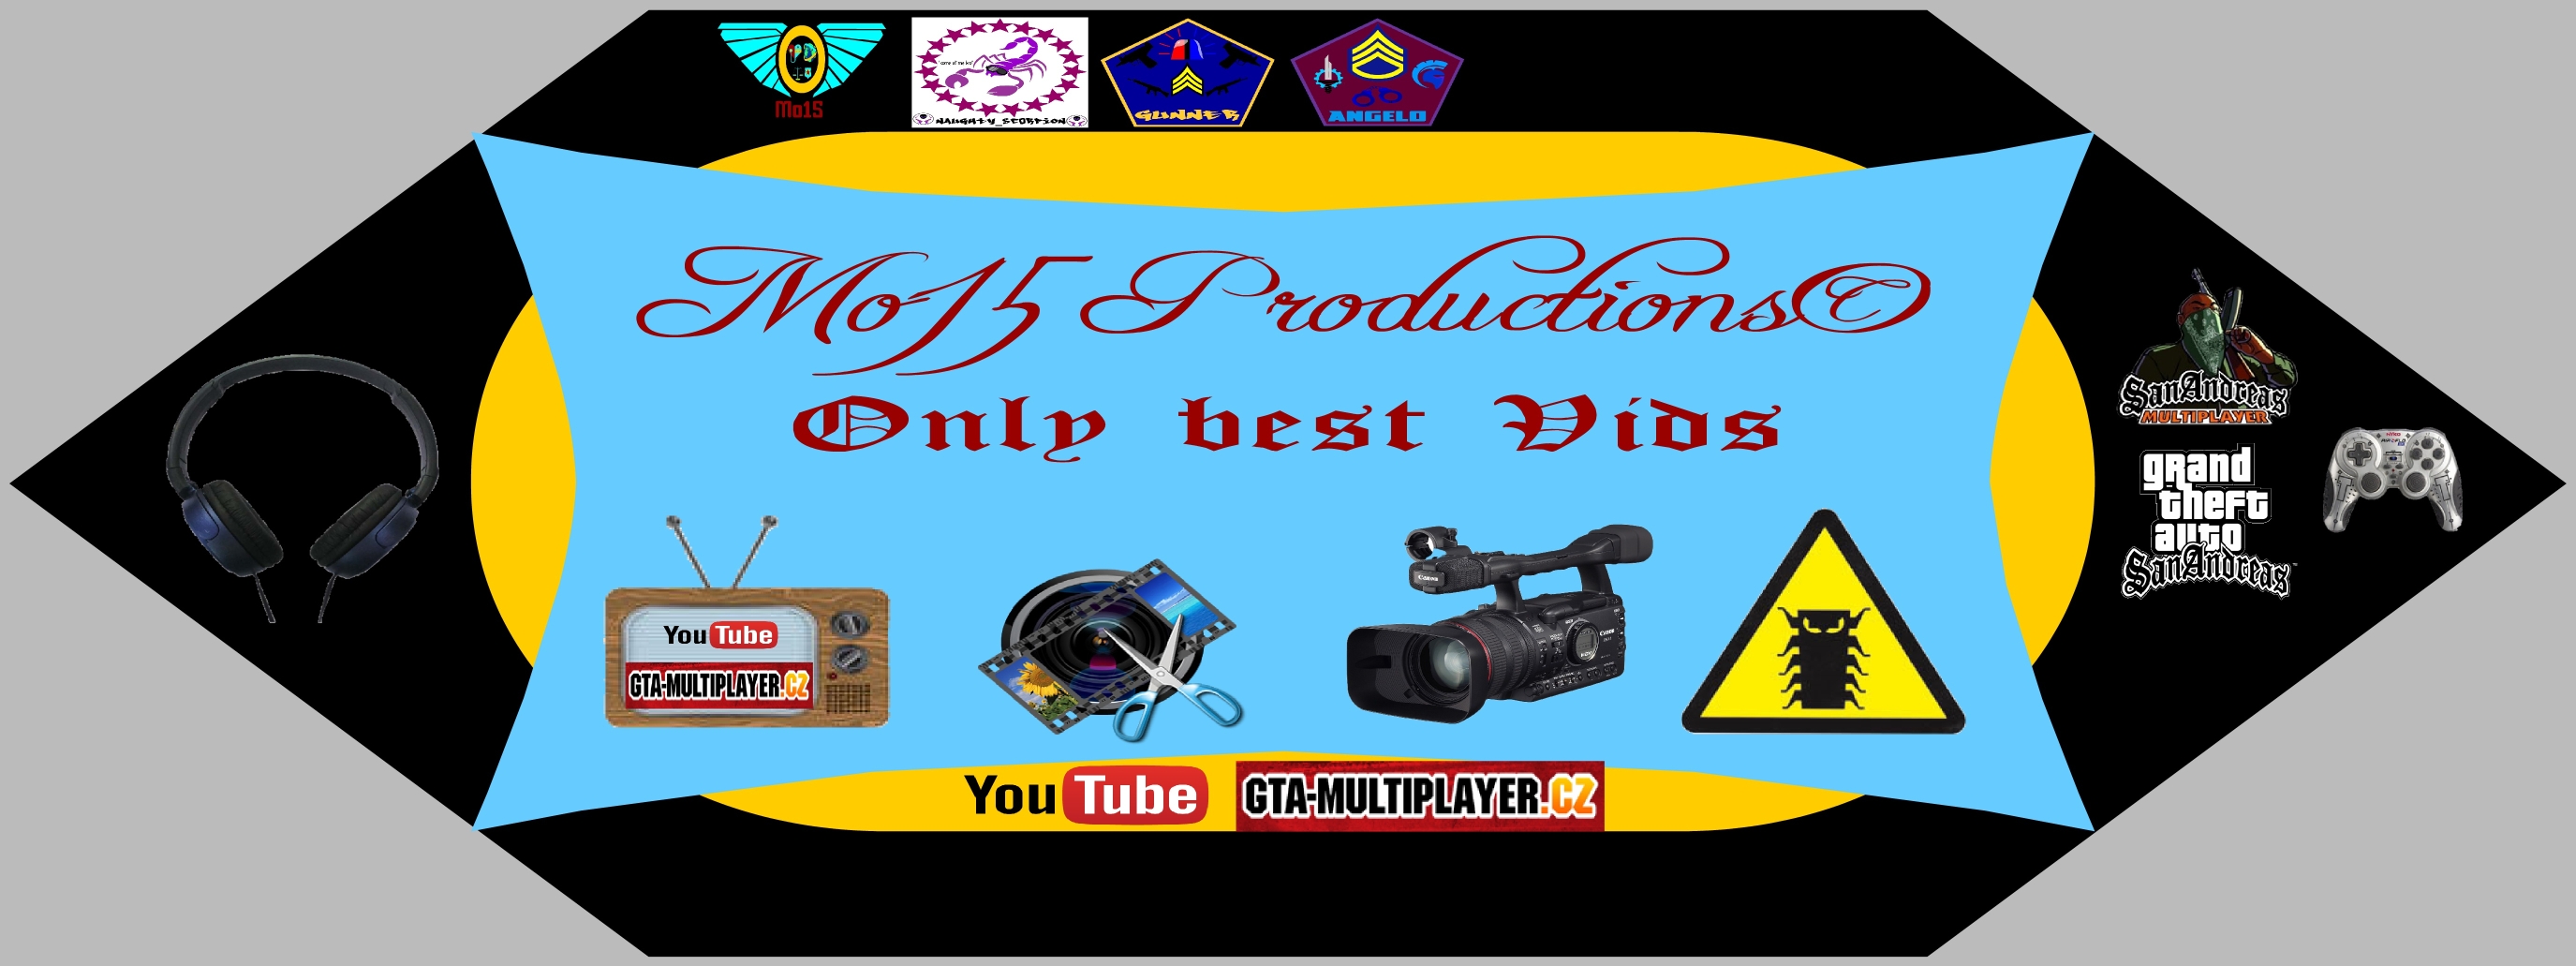 new Mo15 Productions©